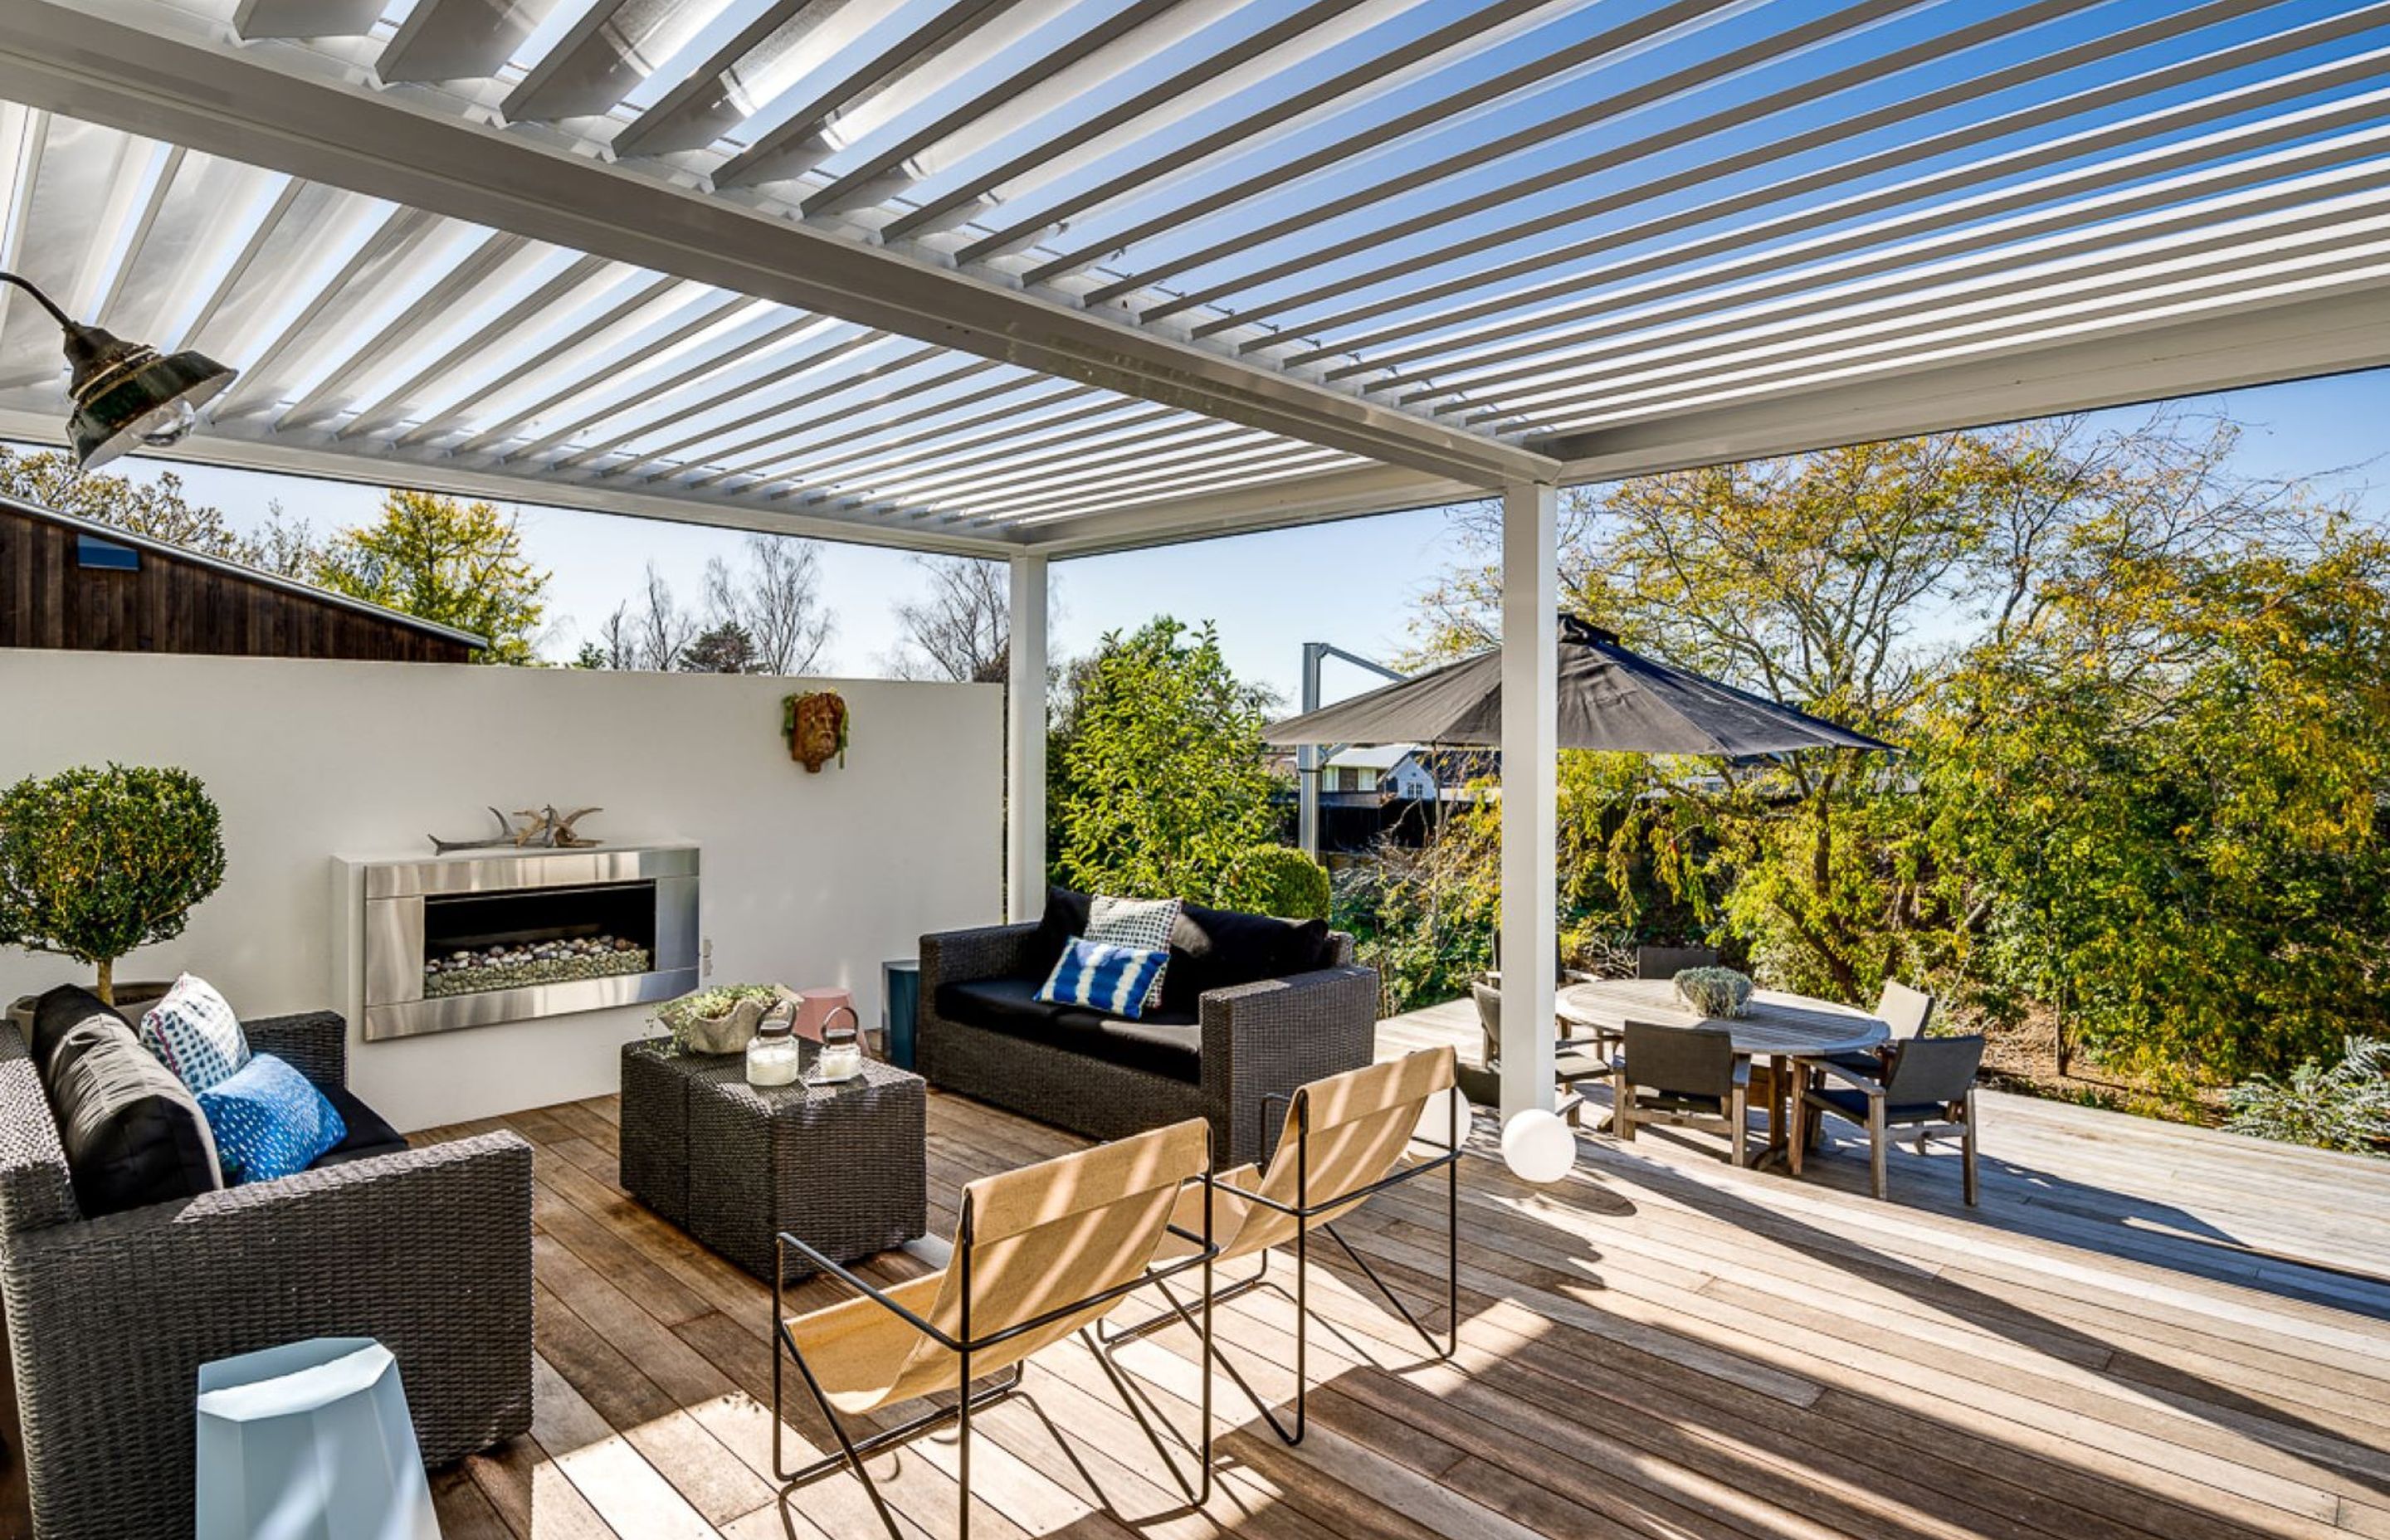 This cosy outdoor area with fireplace is enhanced with a louvre system that allows light in when it's sunny and provides protection from the rain when the louvres are closed.